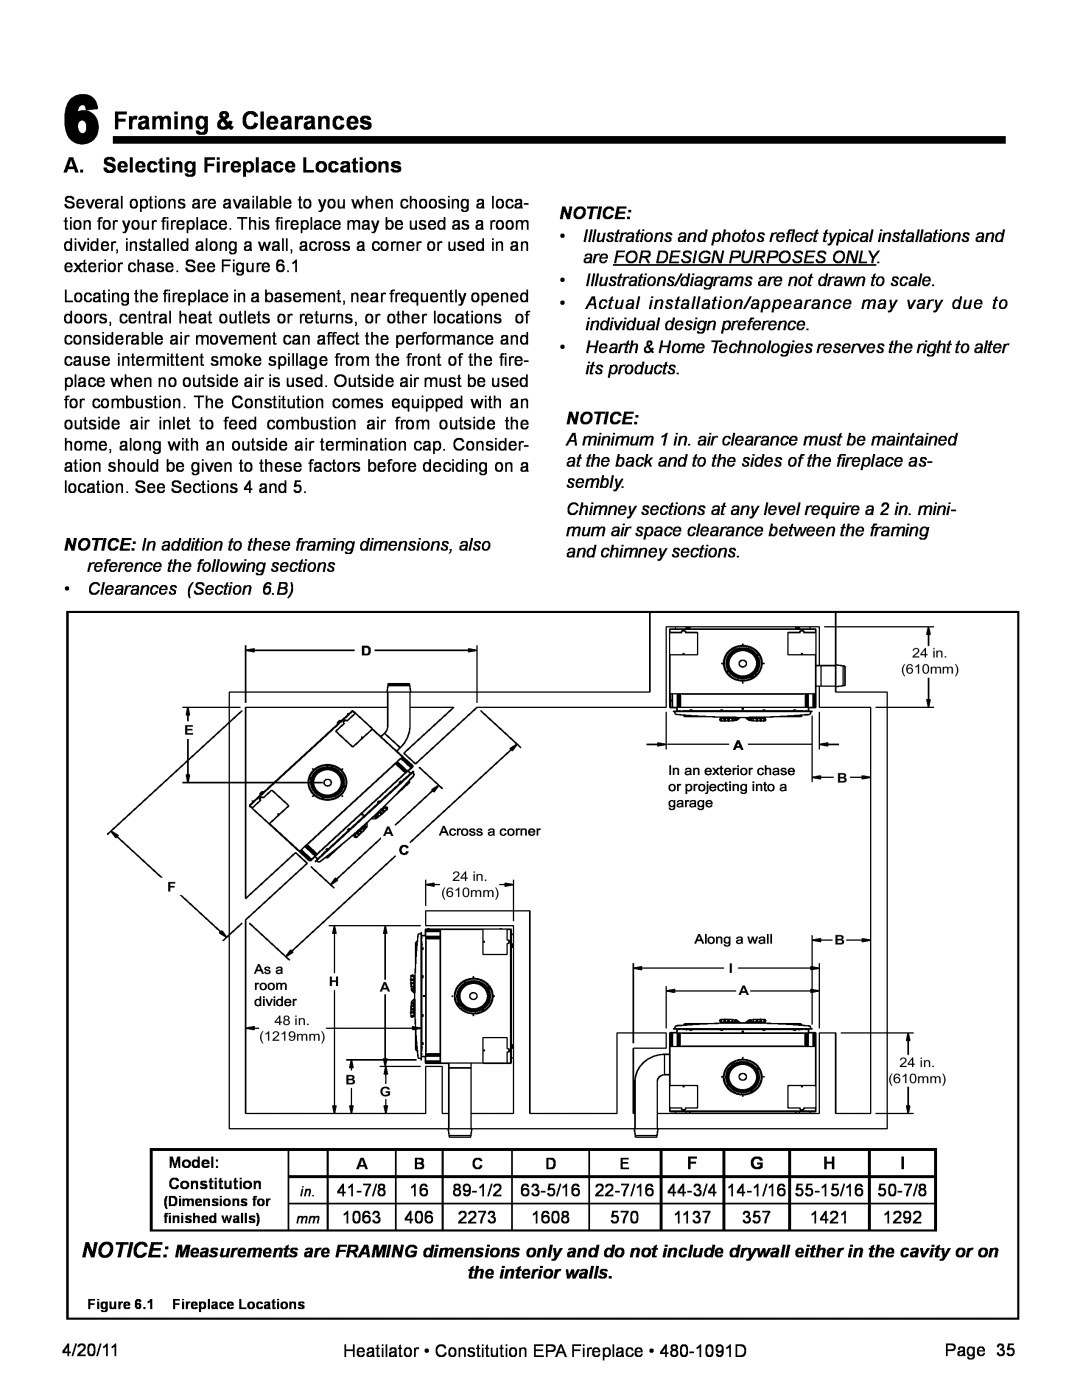 Heatiator C40 owner manual Framing & Clearances, A. Selecting Fireplace Locations, Notice, the interior walls 